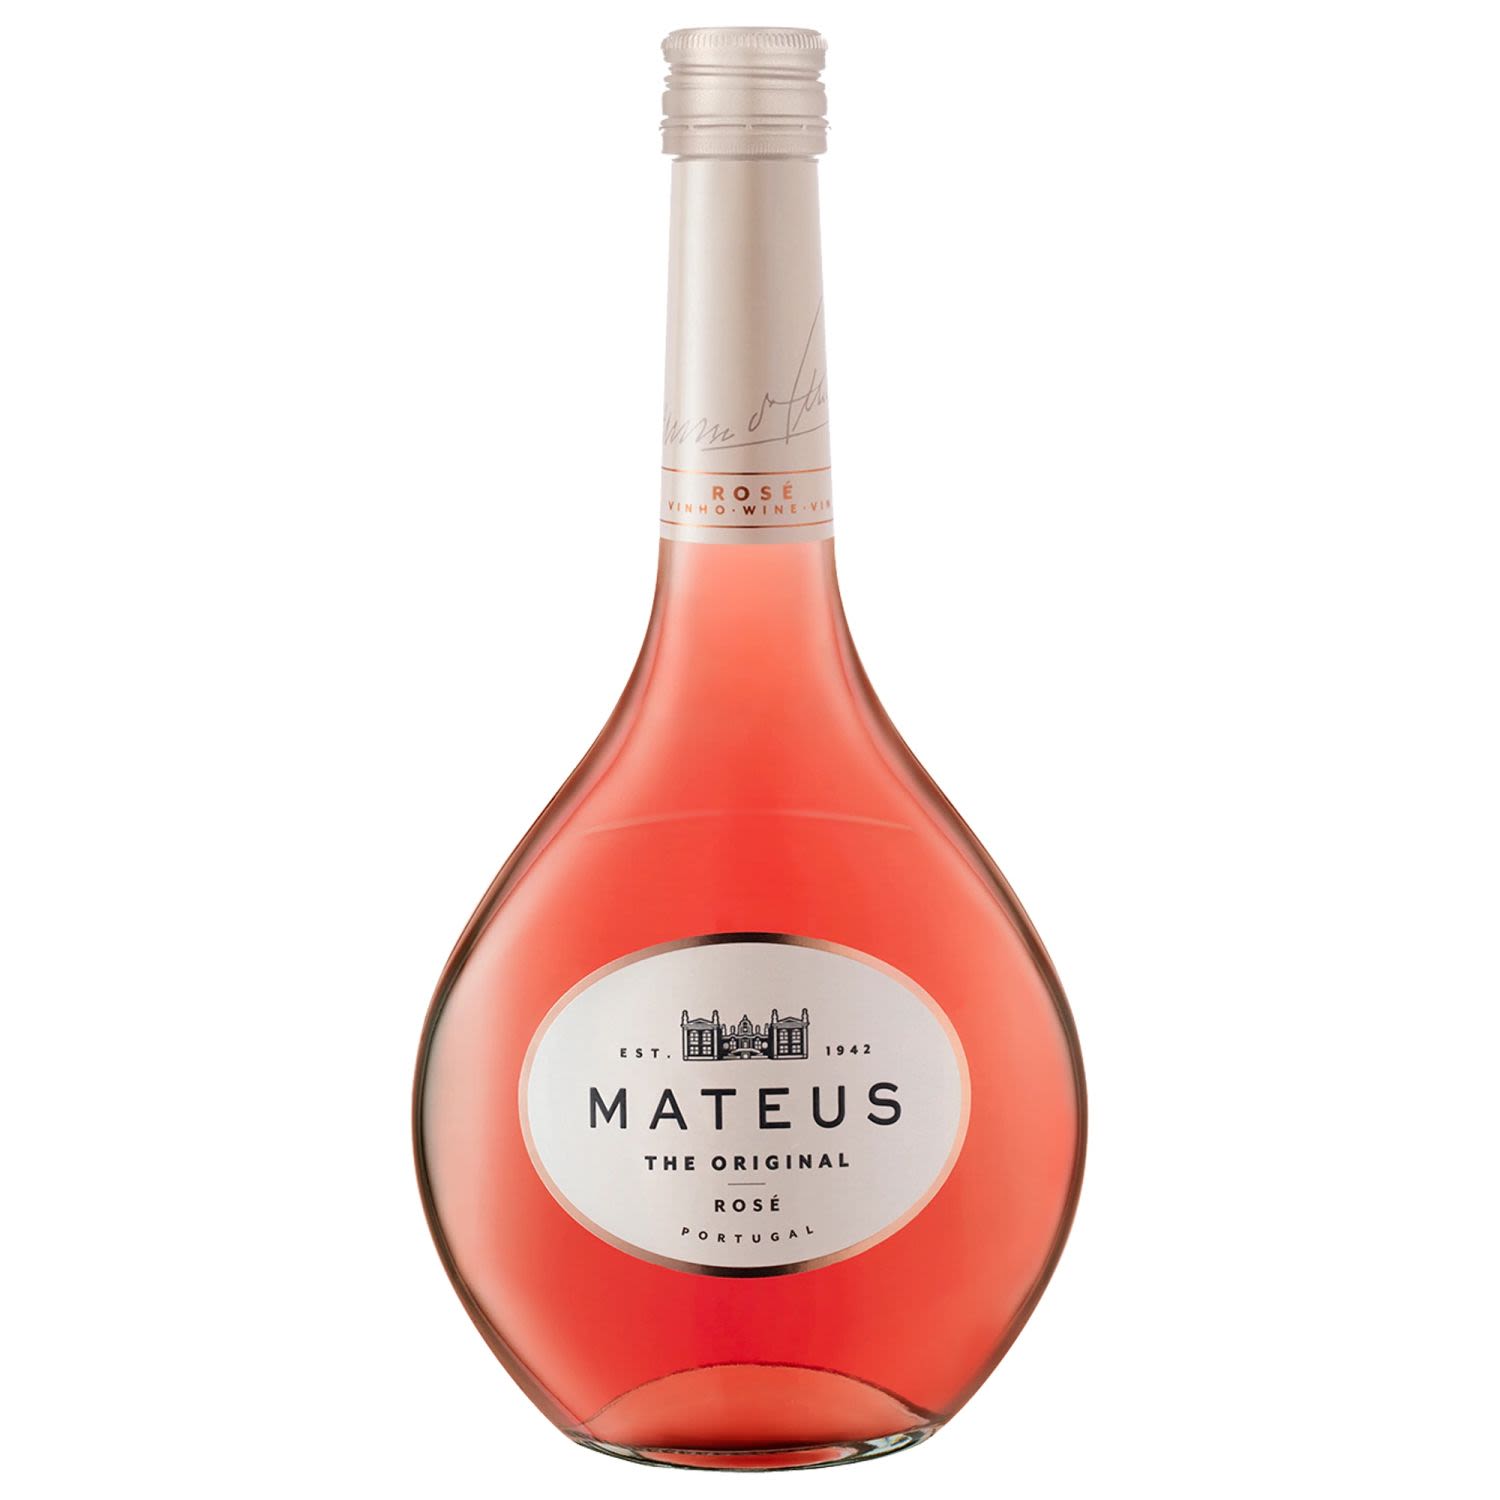 Fresh and lightly pétillant (fizzy), Mateus Rosé Original is all about fun and togetherness. It’s unapologetically unique. A wine to enjoy with your favourite people, day after day. Made from an enticing array of grapes including Baga; Rufete; Tinta Barroca; Touriga Franca this is bright & fresh and best served chilled.<br /> <br />Alcohol Volume: 11.00%<br /><br />Pack Format: Bottle<br /><br />Standard Drinks: 6.5</br /><br />Pack Type: Bottle<br /><br />Country of Origin: Portugal<br /><br />Region: Portugal<br /><br />Vintage: Non Vintage<br />